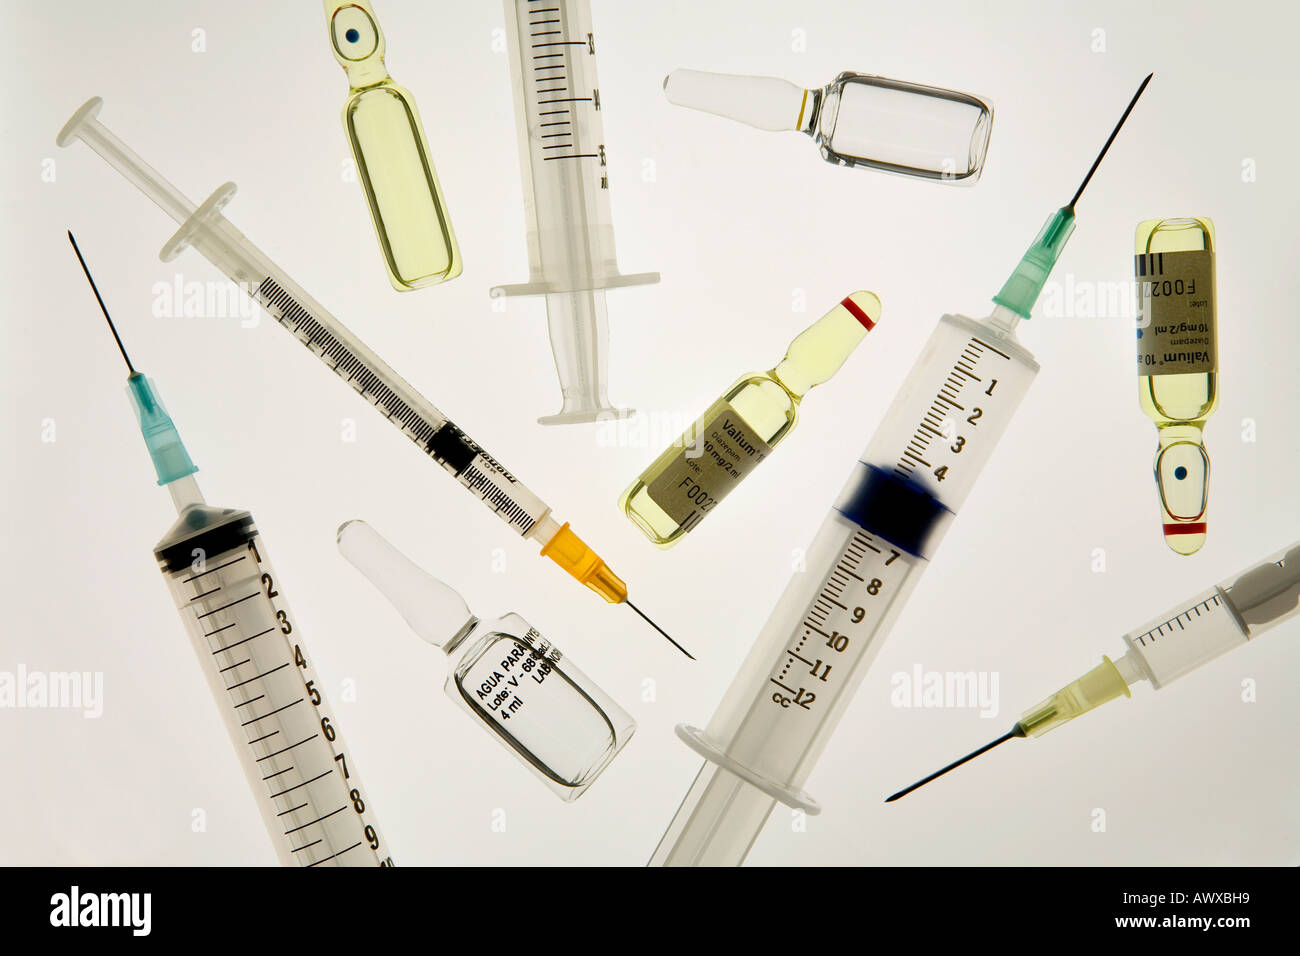 Syringes, Needles and Vials Stock Photo